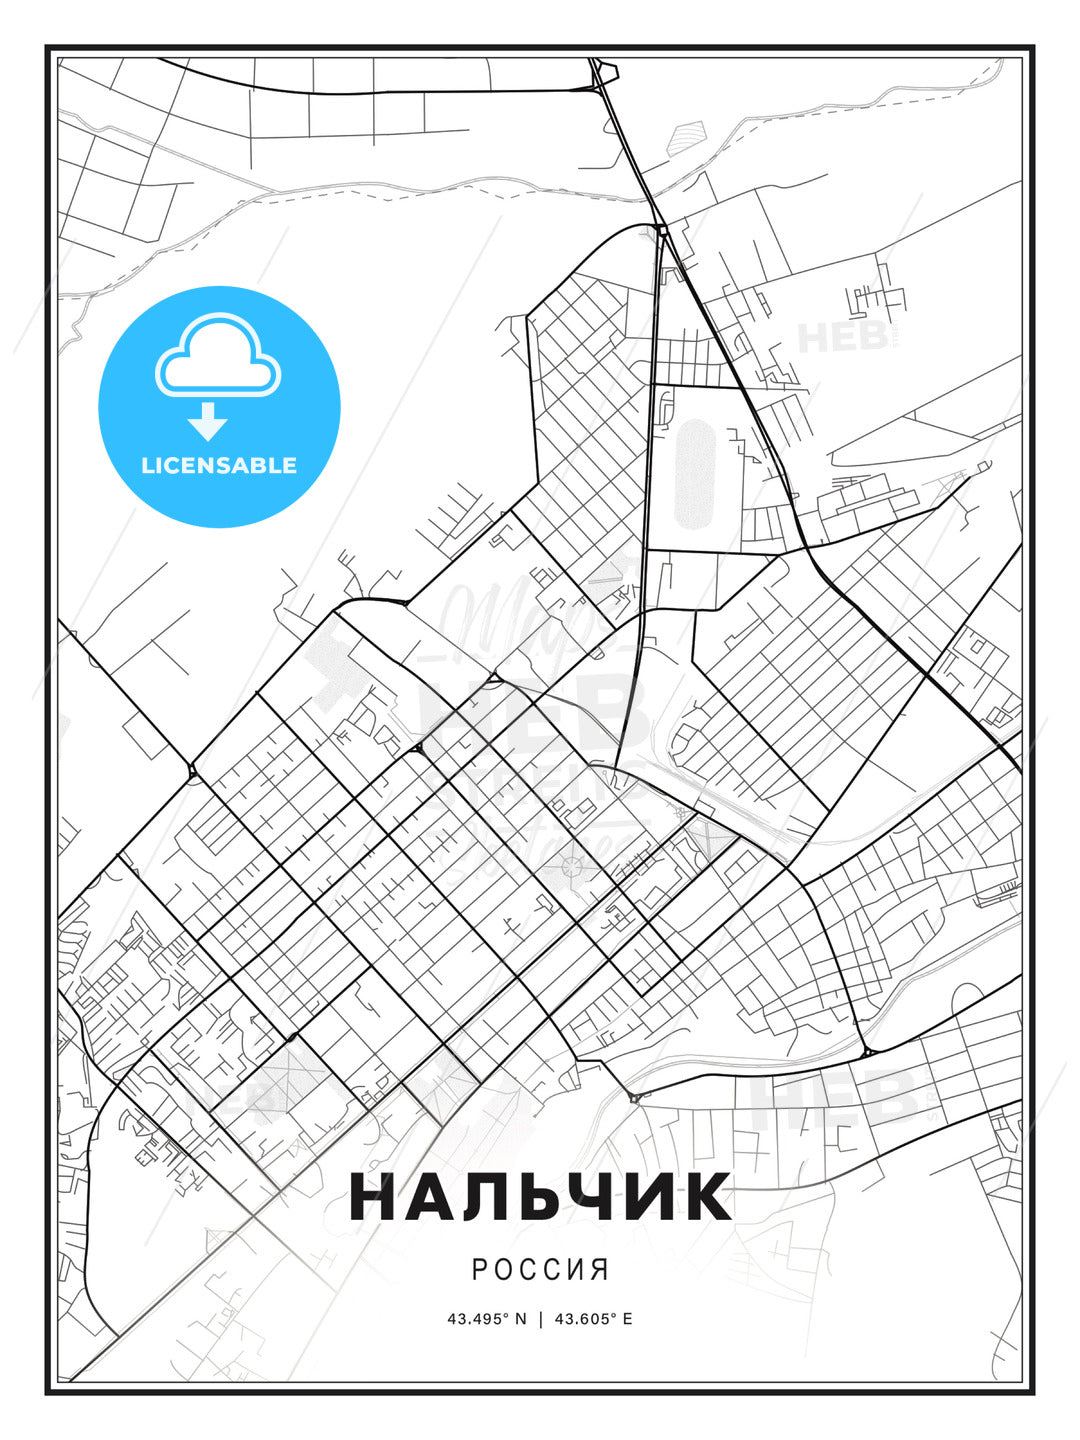 НАЛЬЧИК / Nalchik, Russia, Modern Print Template in Various Formats - HEBSTREITS Sketches